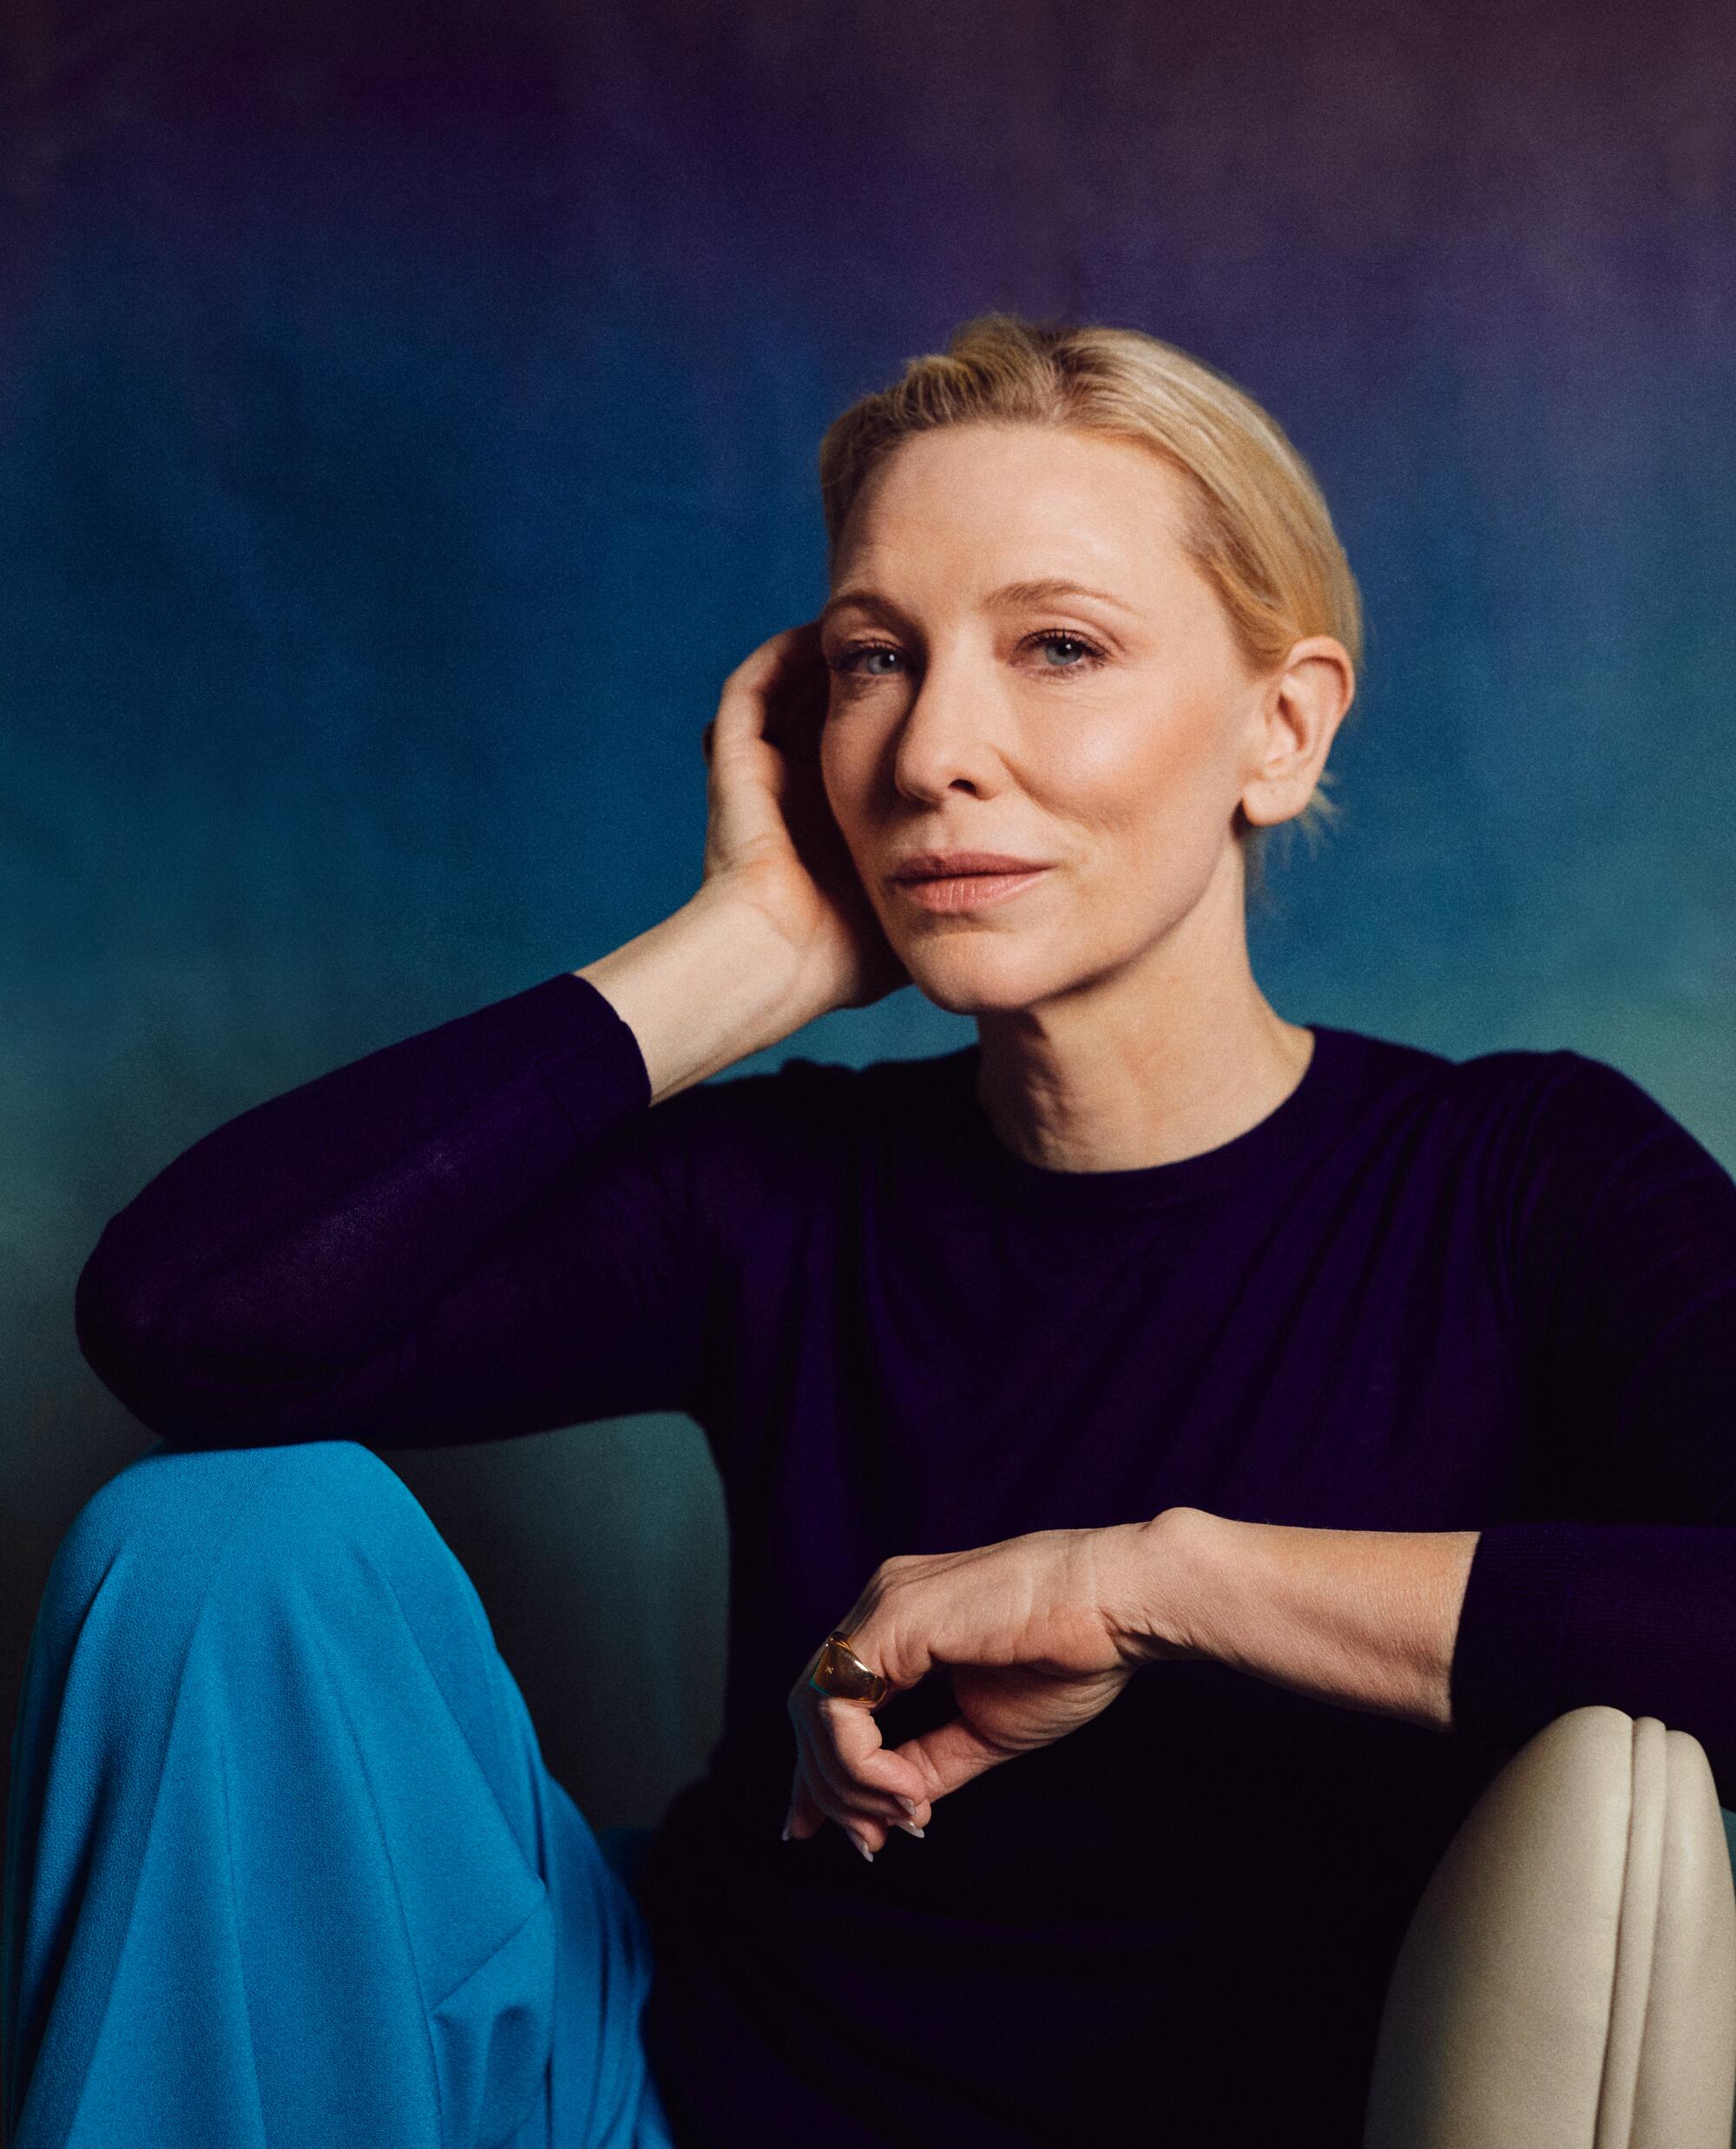 Cate Blanchett sits on a chair, elbow resting on her raised knee.